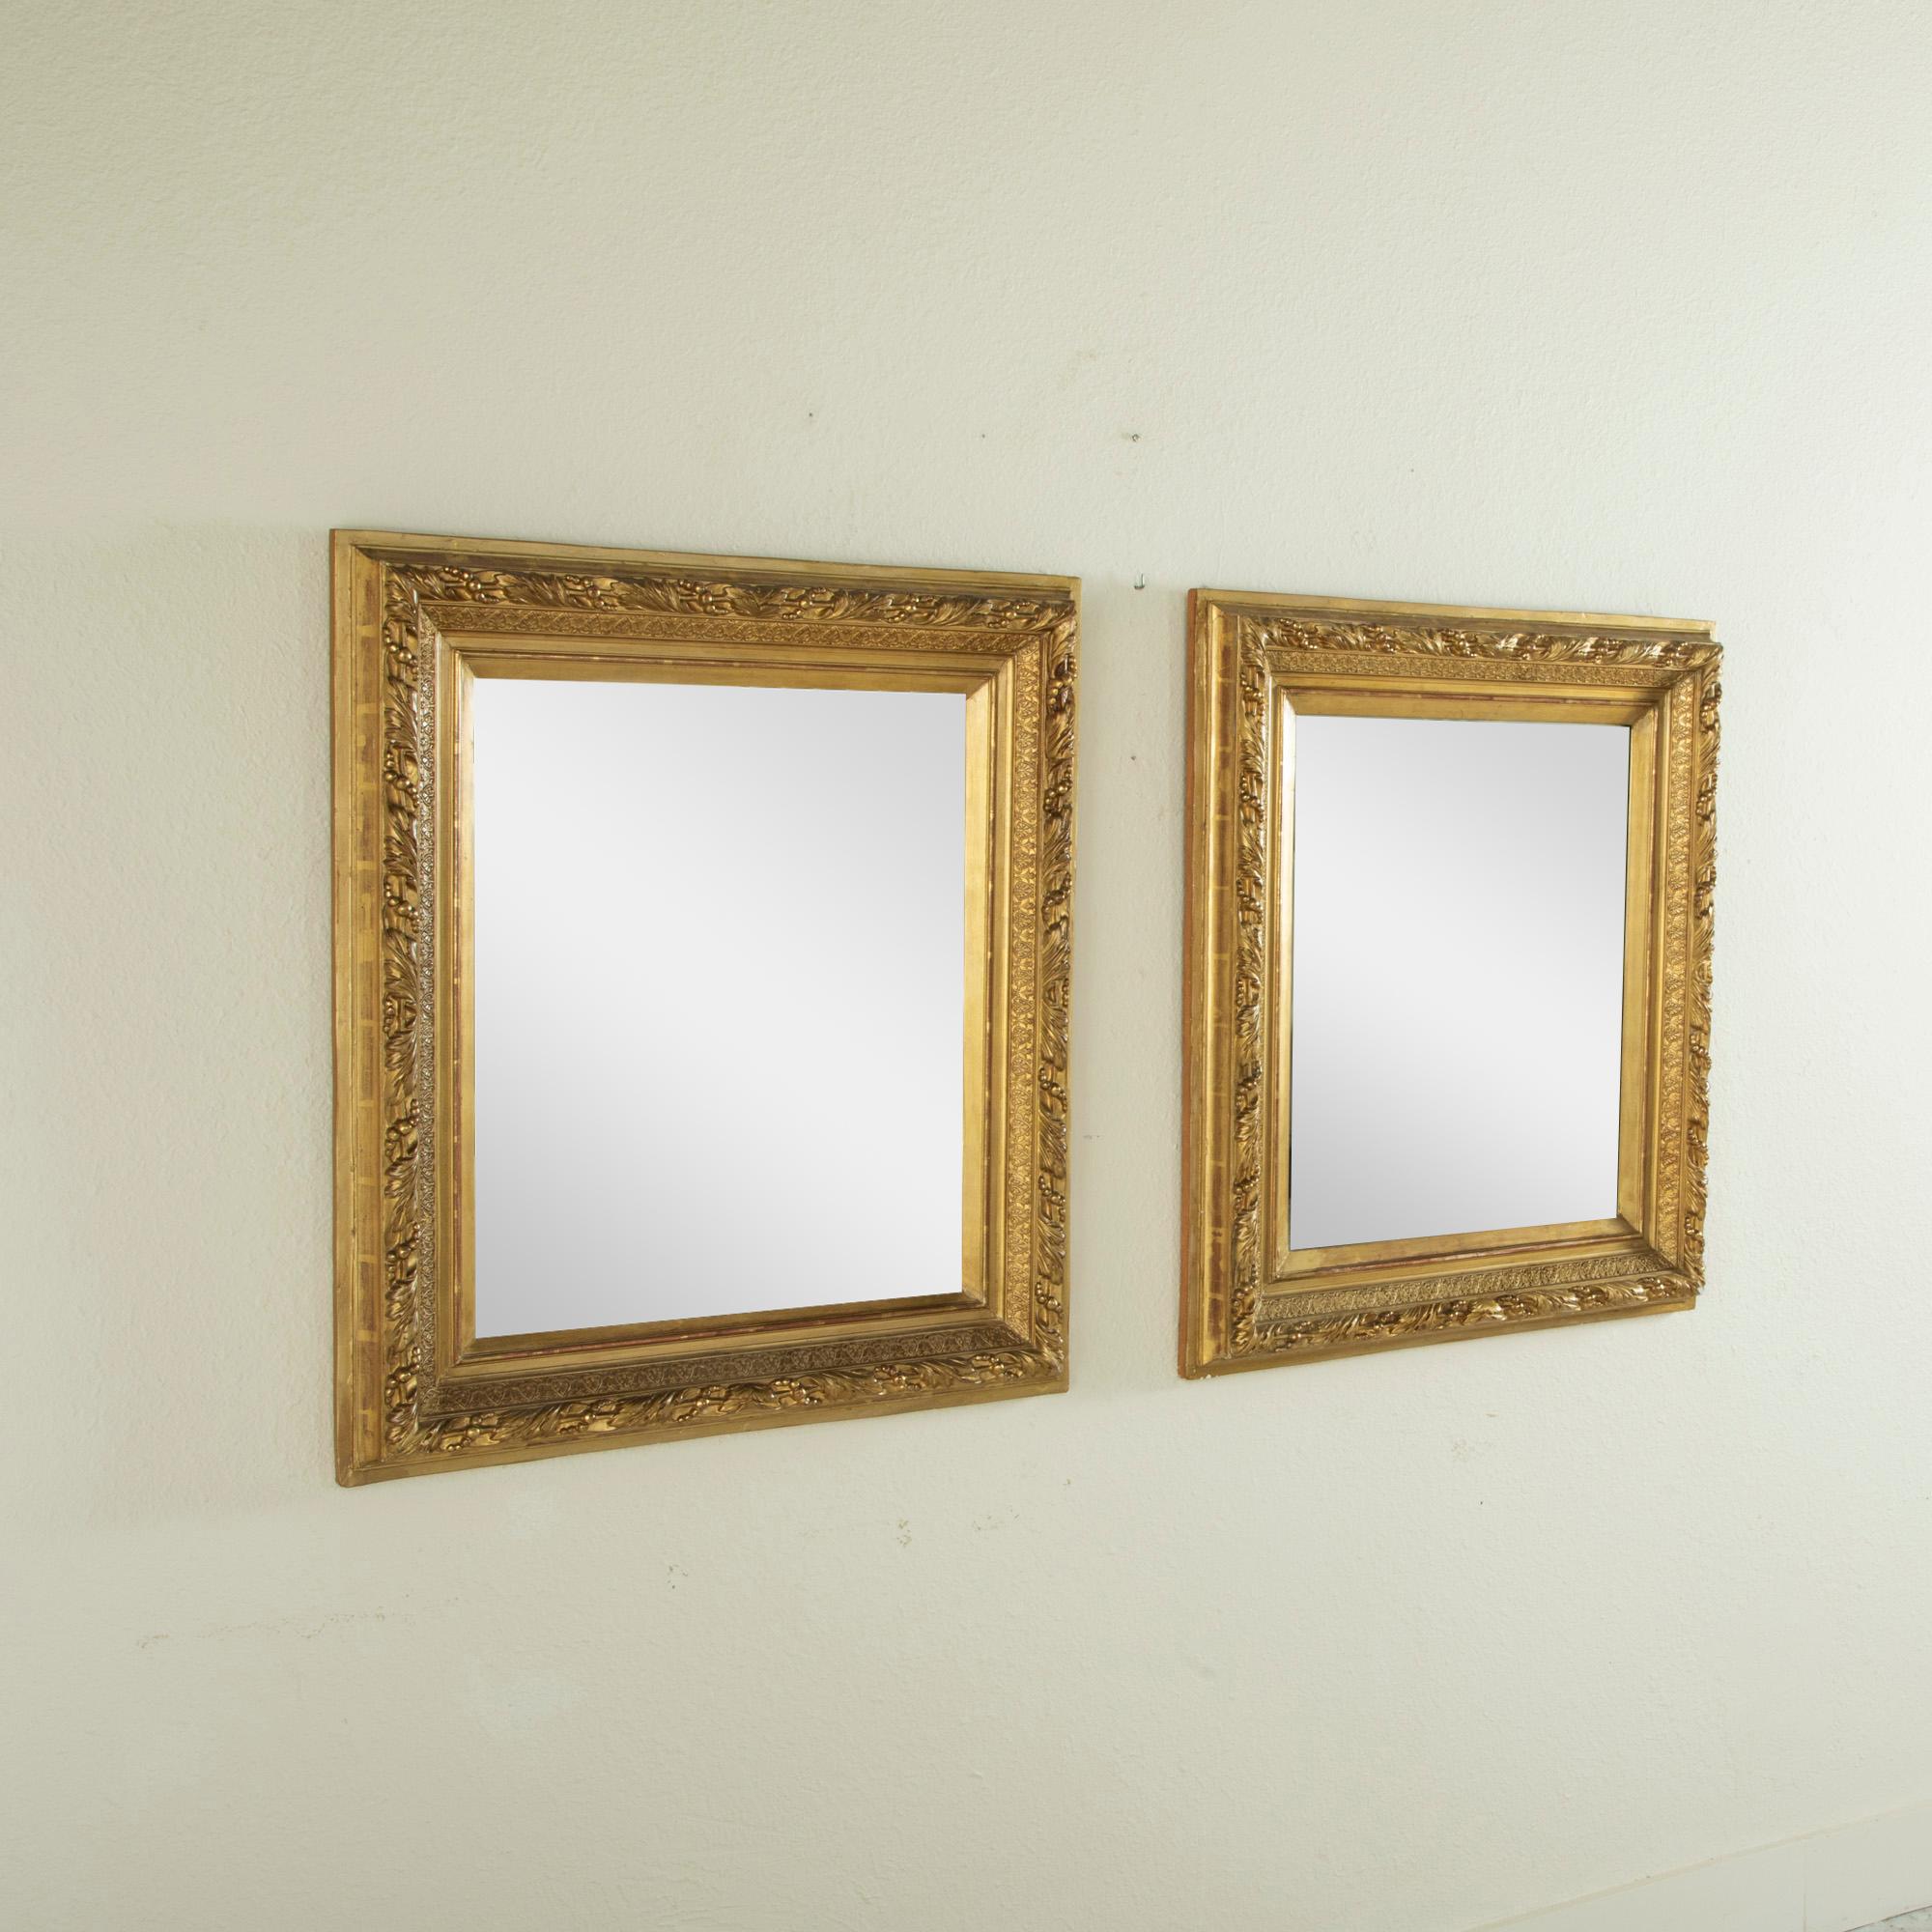 Pair of Late 19th Century French Restauration Style Gilt Wood Wall Mirrors 1